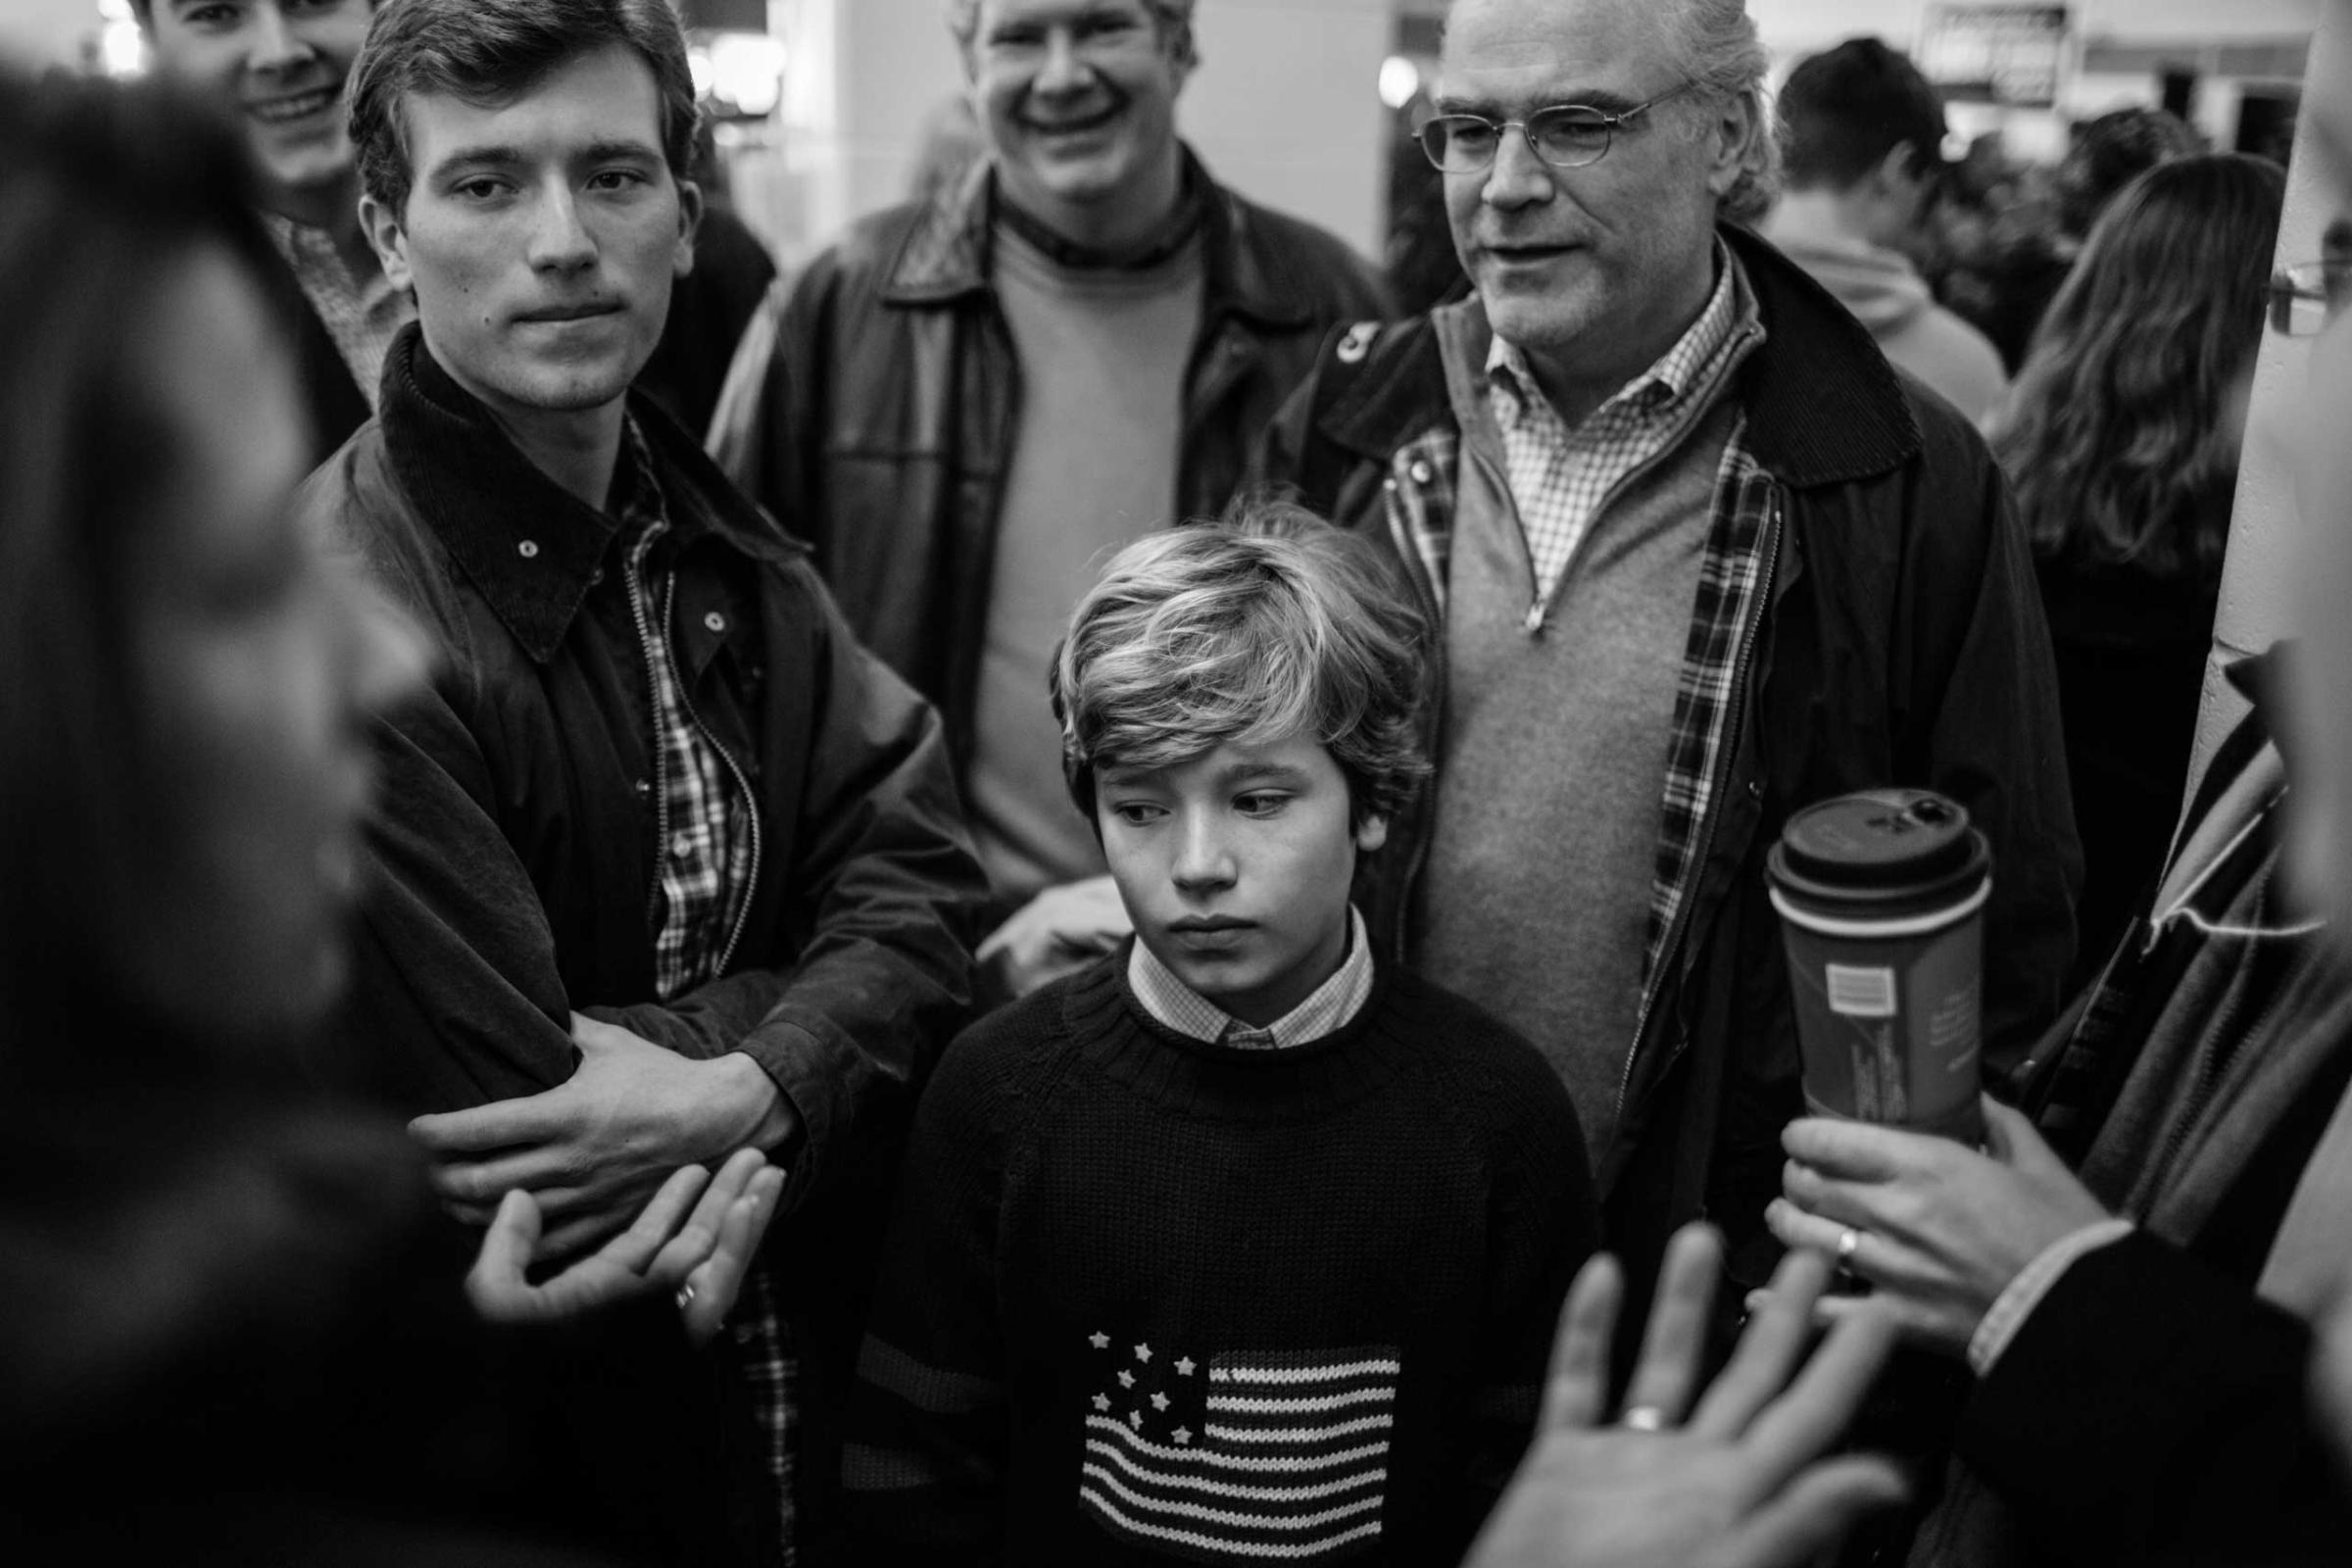 07-Feb-2016---Londonderry,-New-Hampshire---A-boy-stands-encircled-by-family-at-a-Marco-Rubio-Pancake-event-Cedric-Von-Niederhausern-politics-convention-hillary-clinton-donald-trump-documentary-photo-journalism-black-andwhite